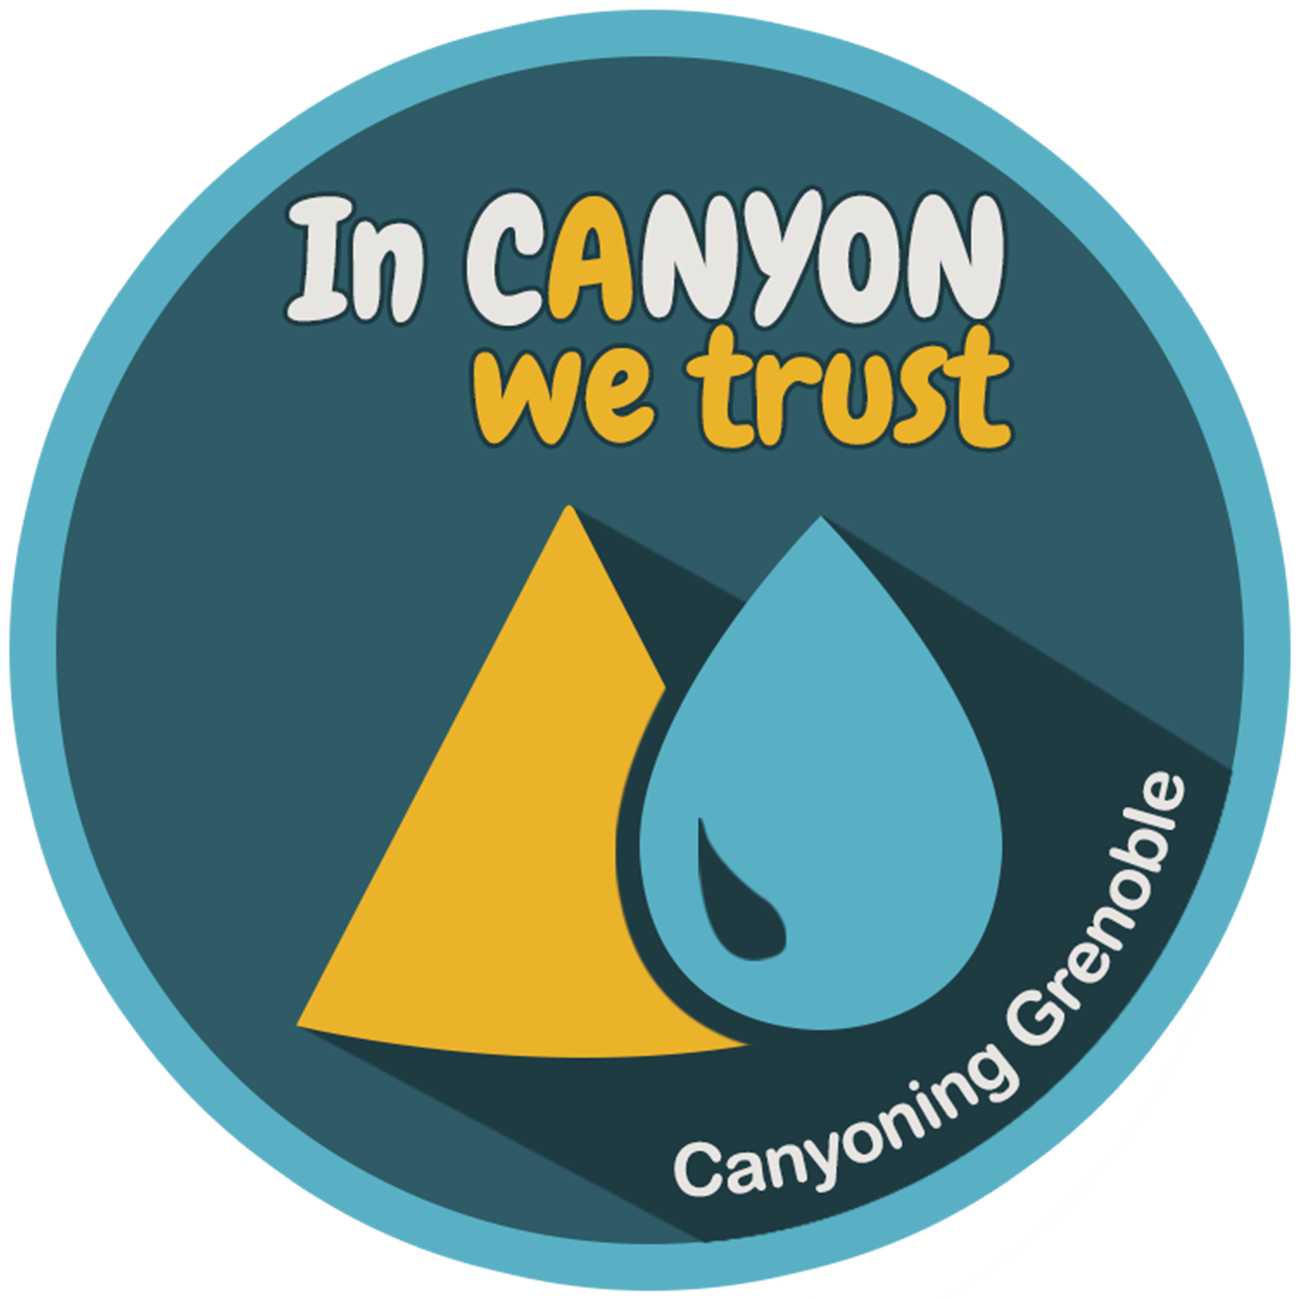 logo in canyon we trust canyoning à Grenoble, Lyon, Vercors